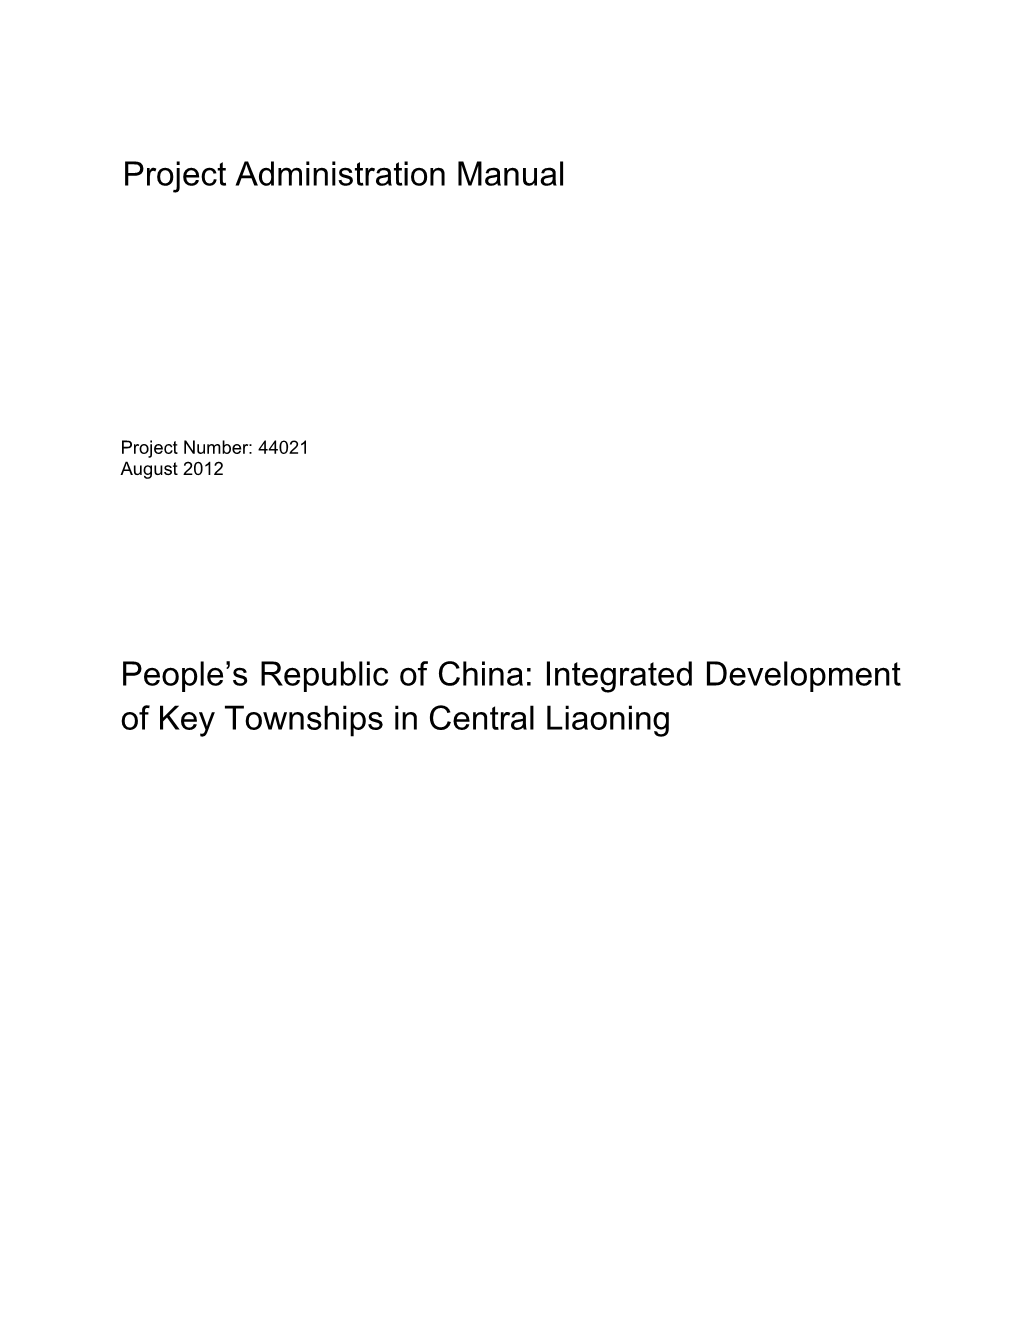 PAM: PRC: Integrated Development of Key Townships in Central Liaoning